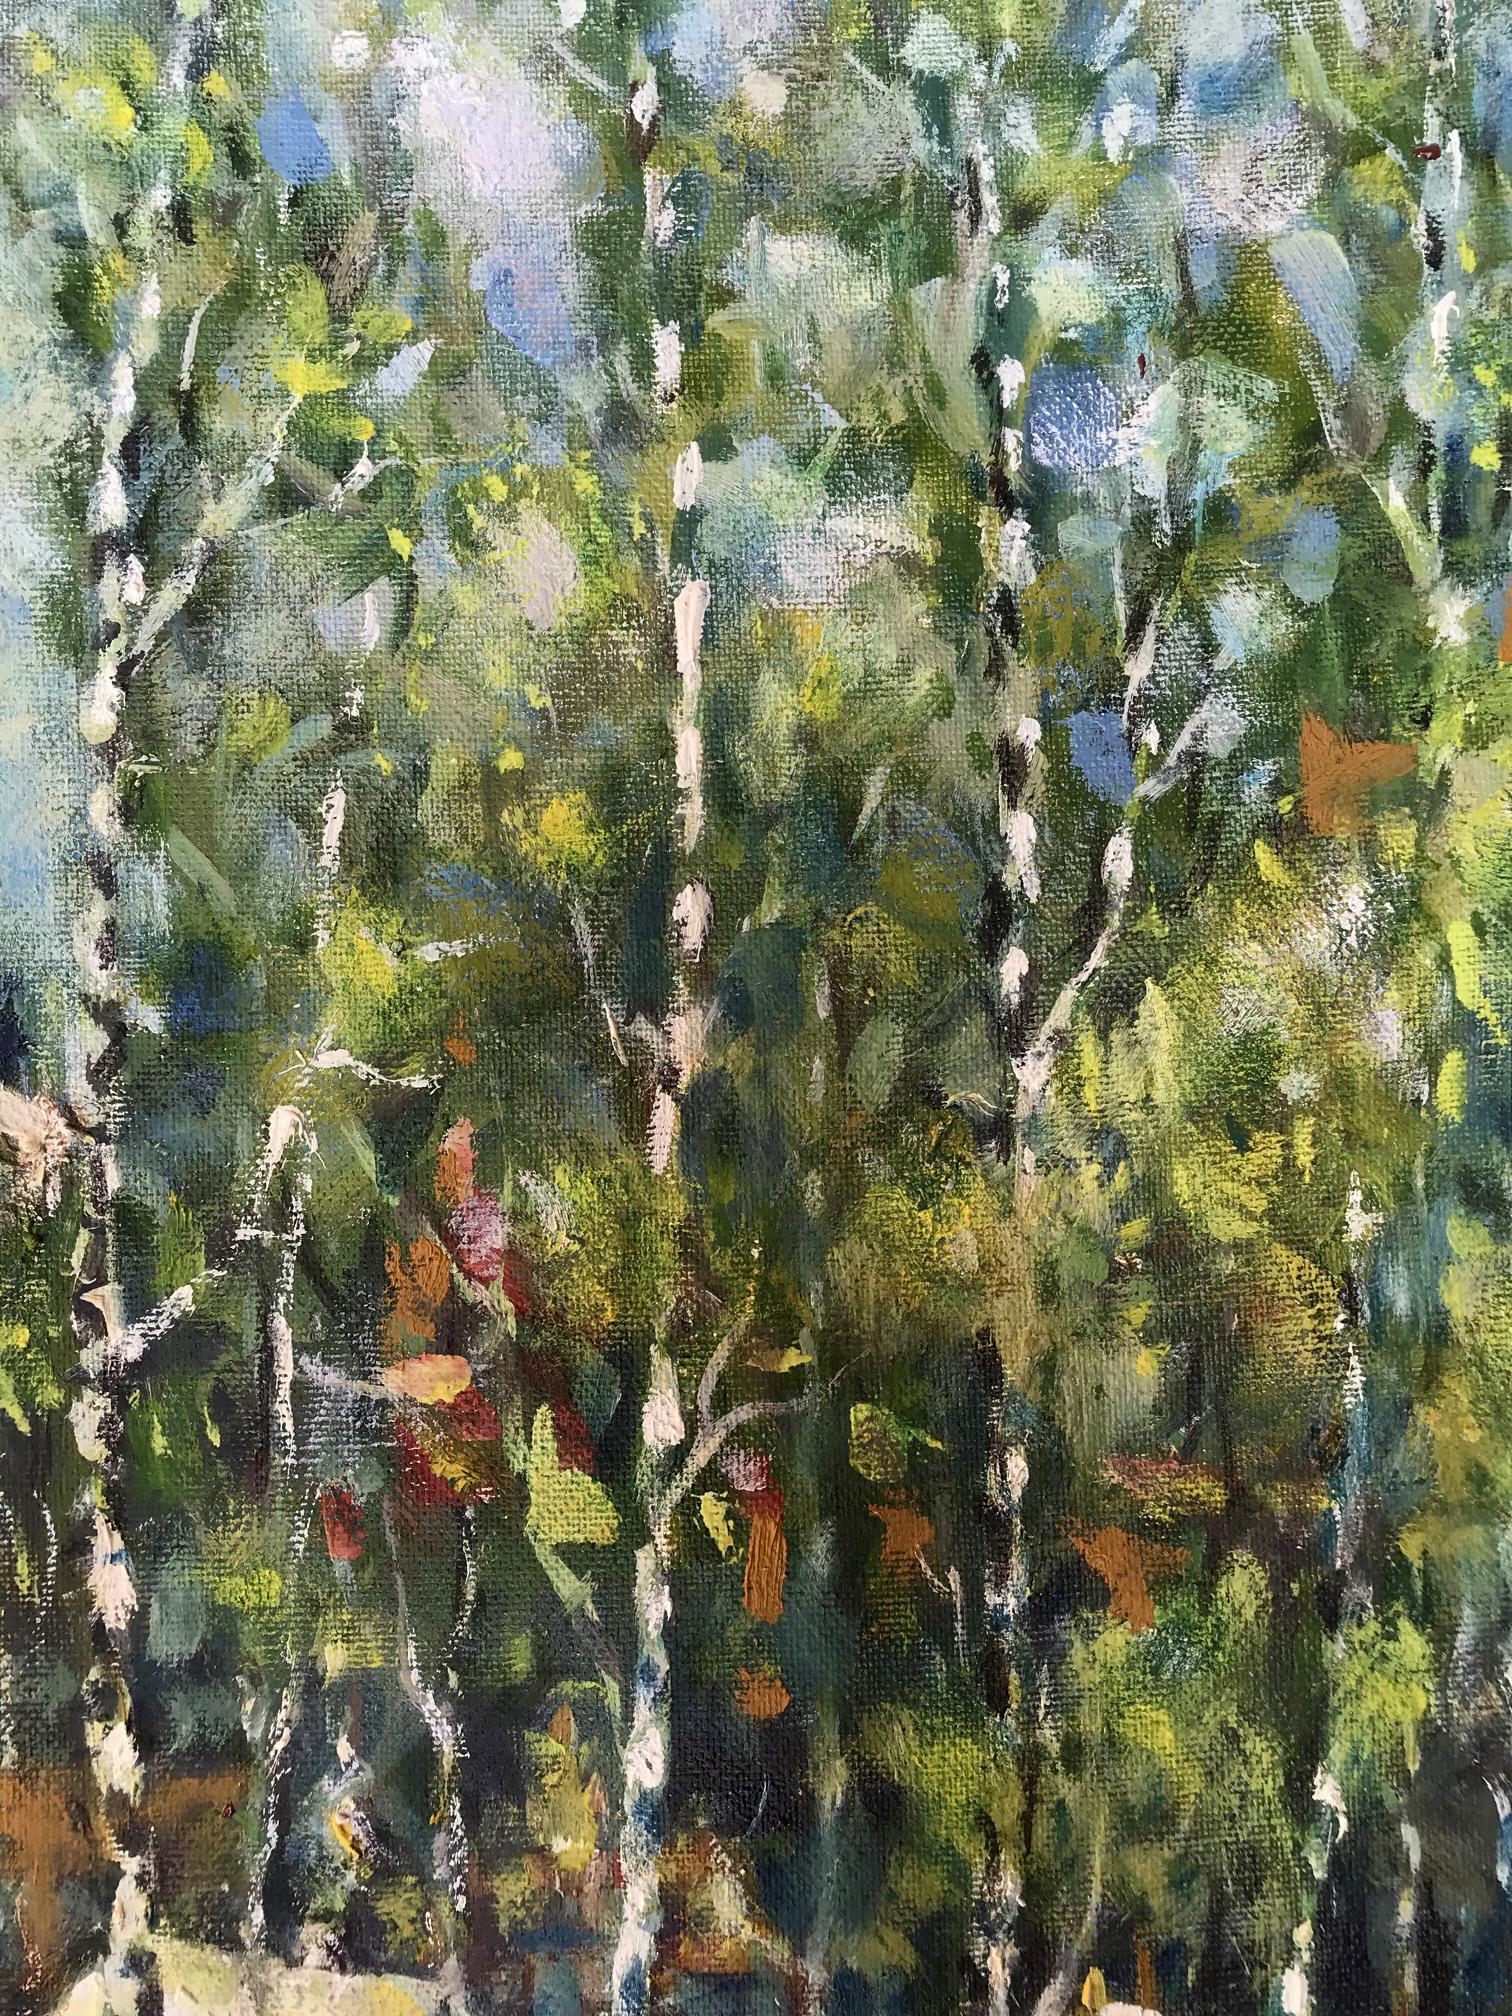 Shapoval Ivan Leontyevich captures Sumy's birches in his oil artwork